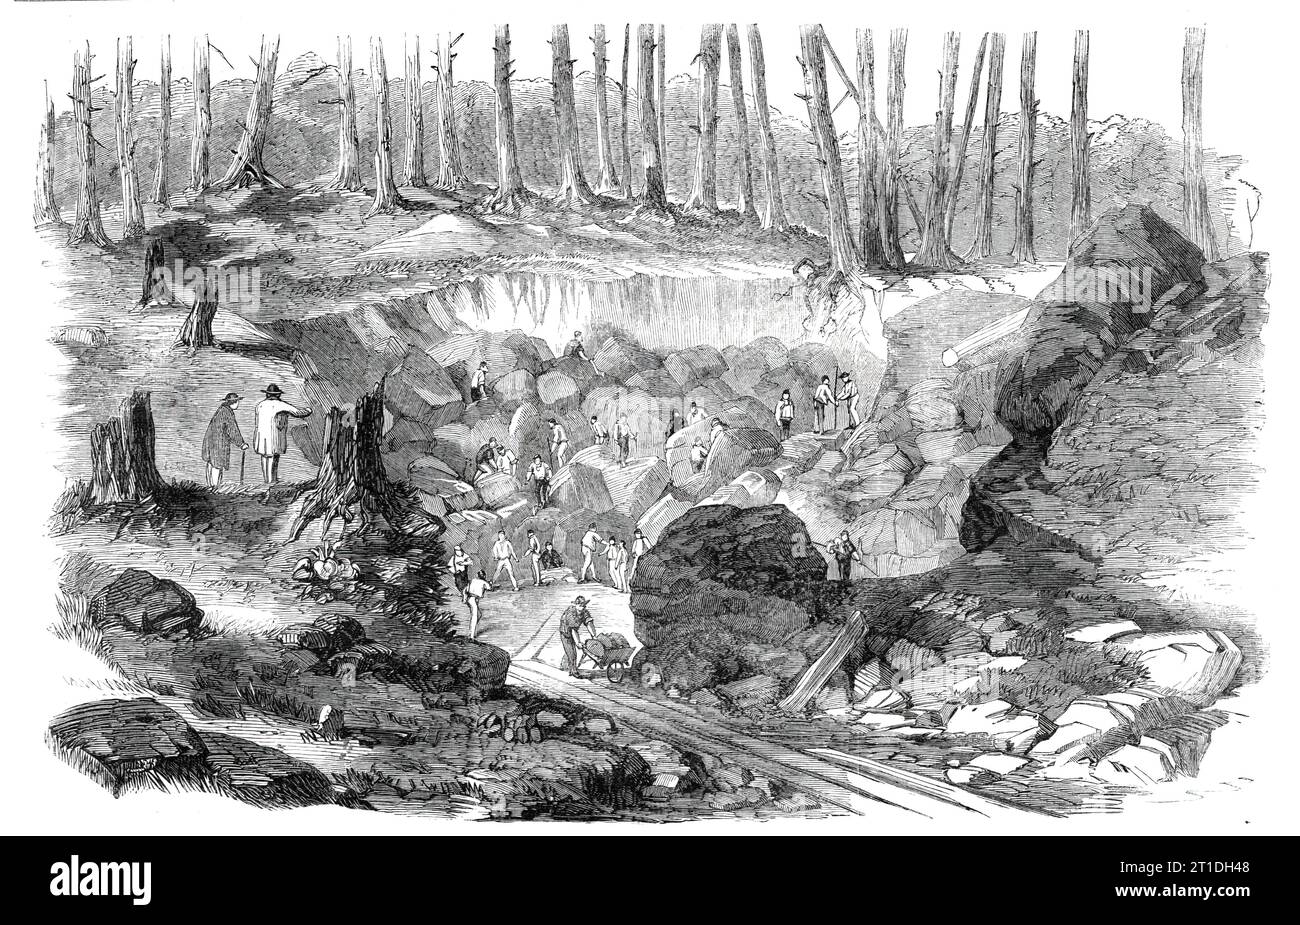 Copper mine or quarry, near Montreal, Canada - from a sketch by our special artist, G. A. Andrews, 1860. Excitement due to the '...discovery of an immense deposit of copper ore in the hillside near the village of Acton, Canada East...Excursion-trains run from Montreal expressly to visit the mines; and, as the proprietor makes a charge for admission...he is likely to make a rich harvest of gold and silver, as well as of copper, by his discovery...The face of a considerable hill has been laid open, and what appears a large stone quarry is being worked by about a hundred men, who are continually Stock Photo